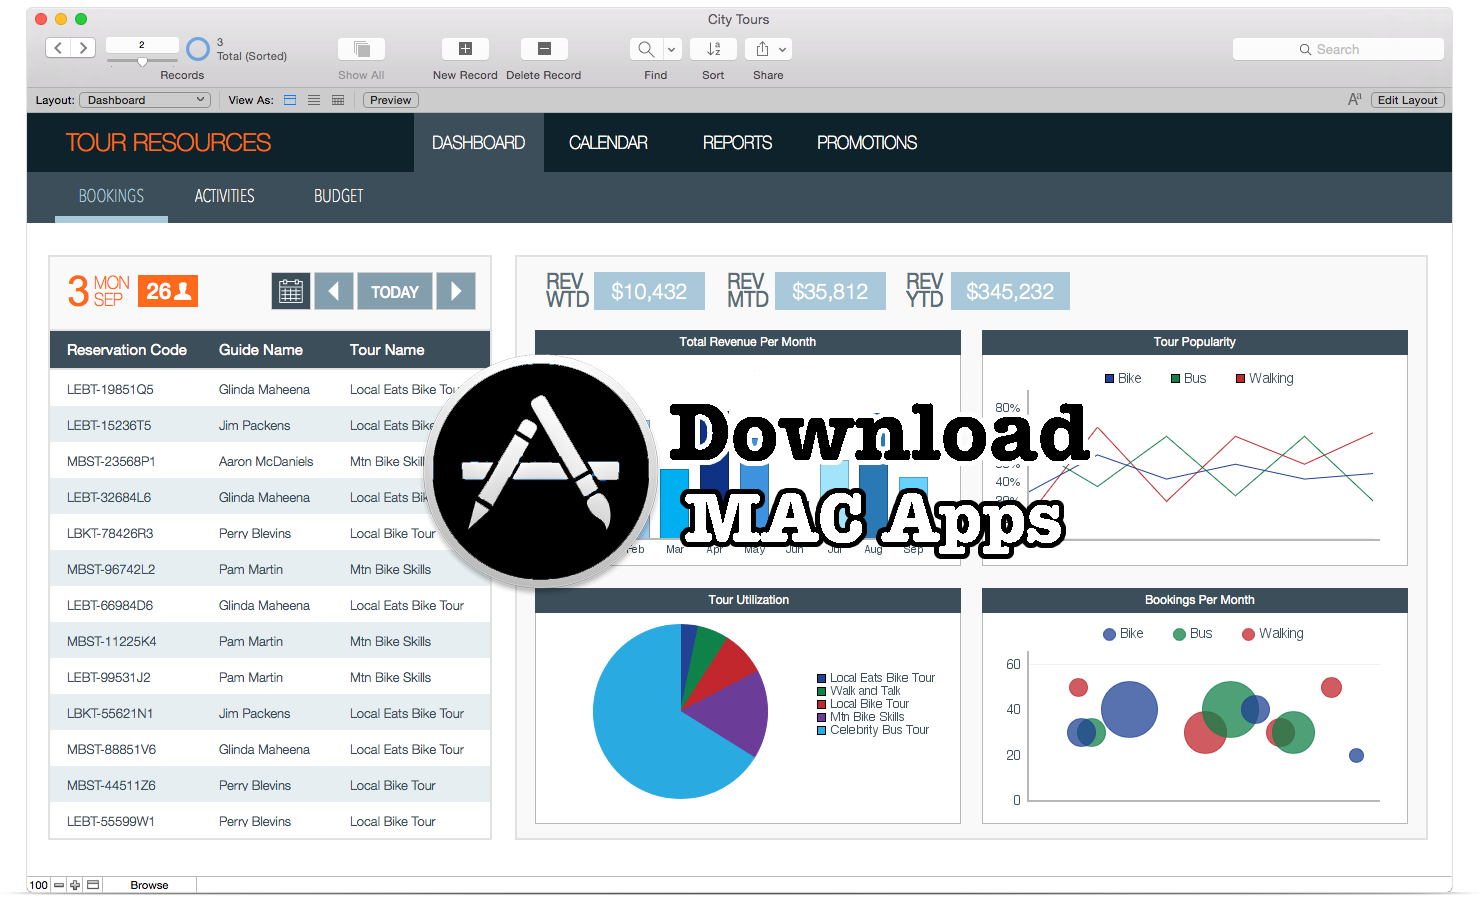 filemaker pro for mac students